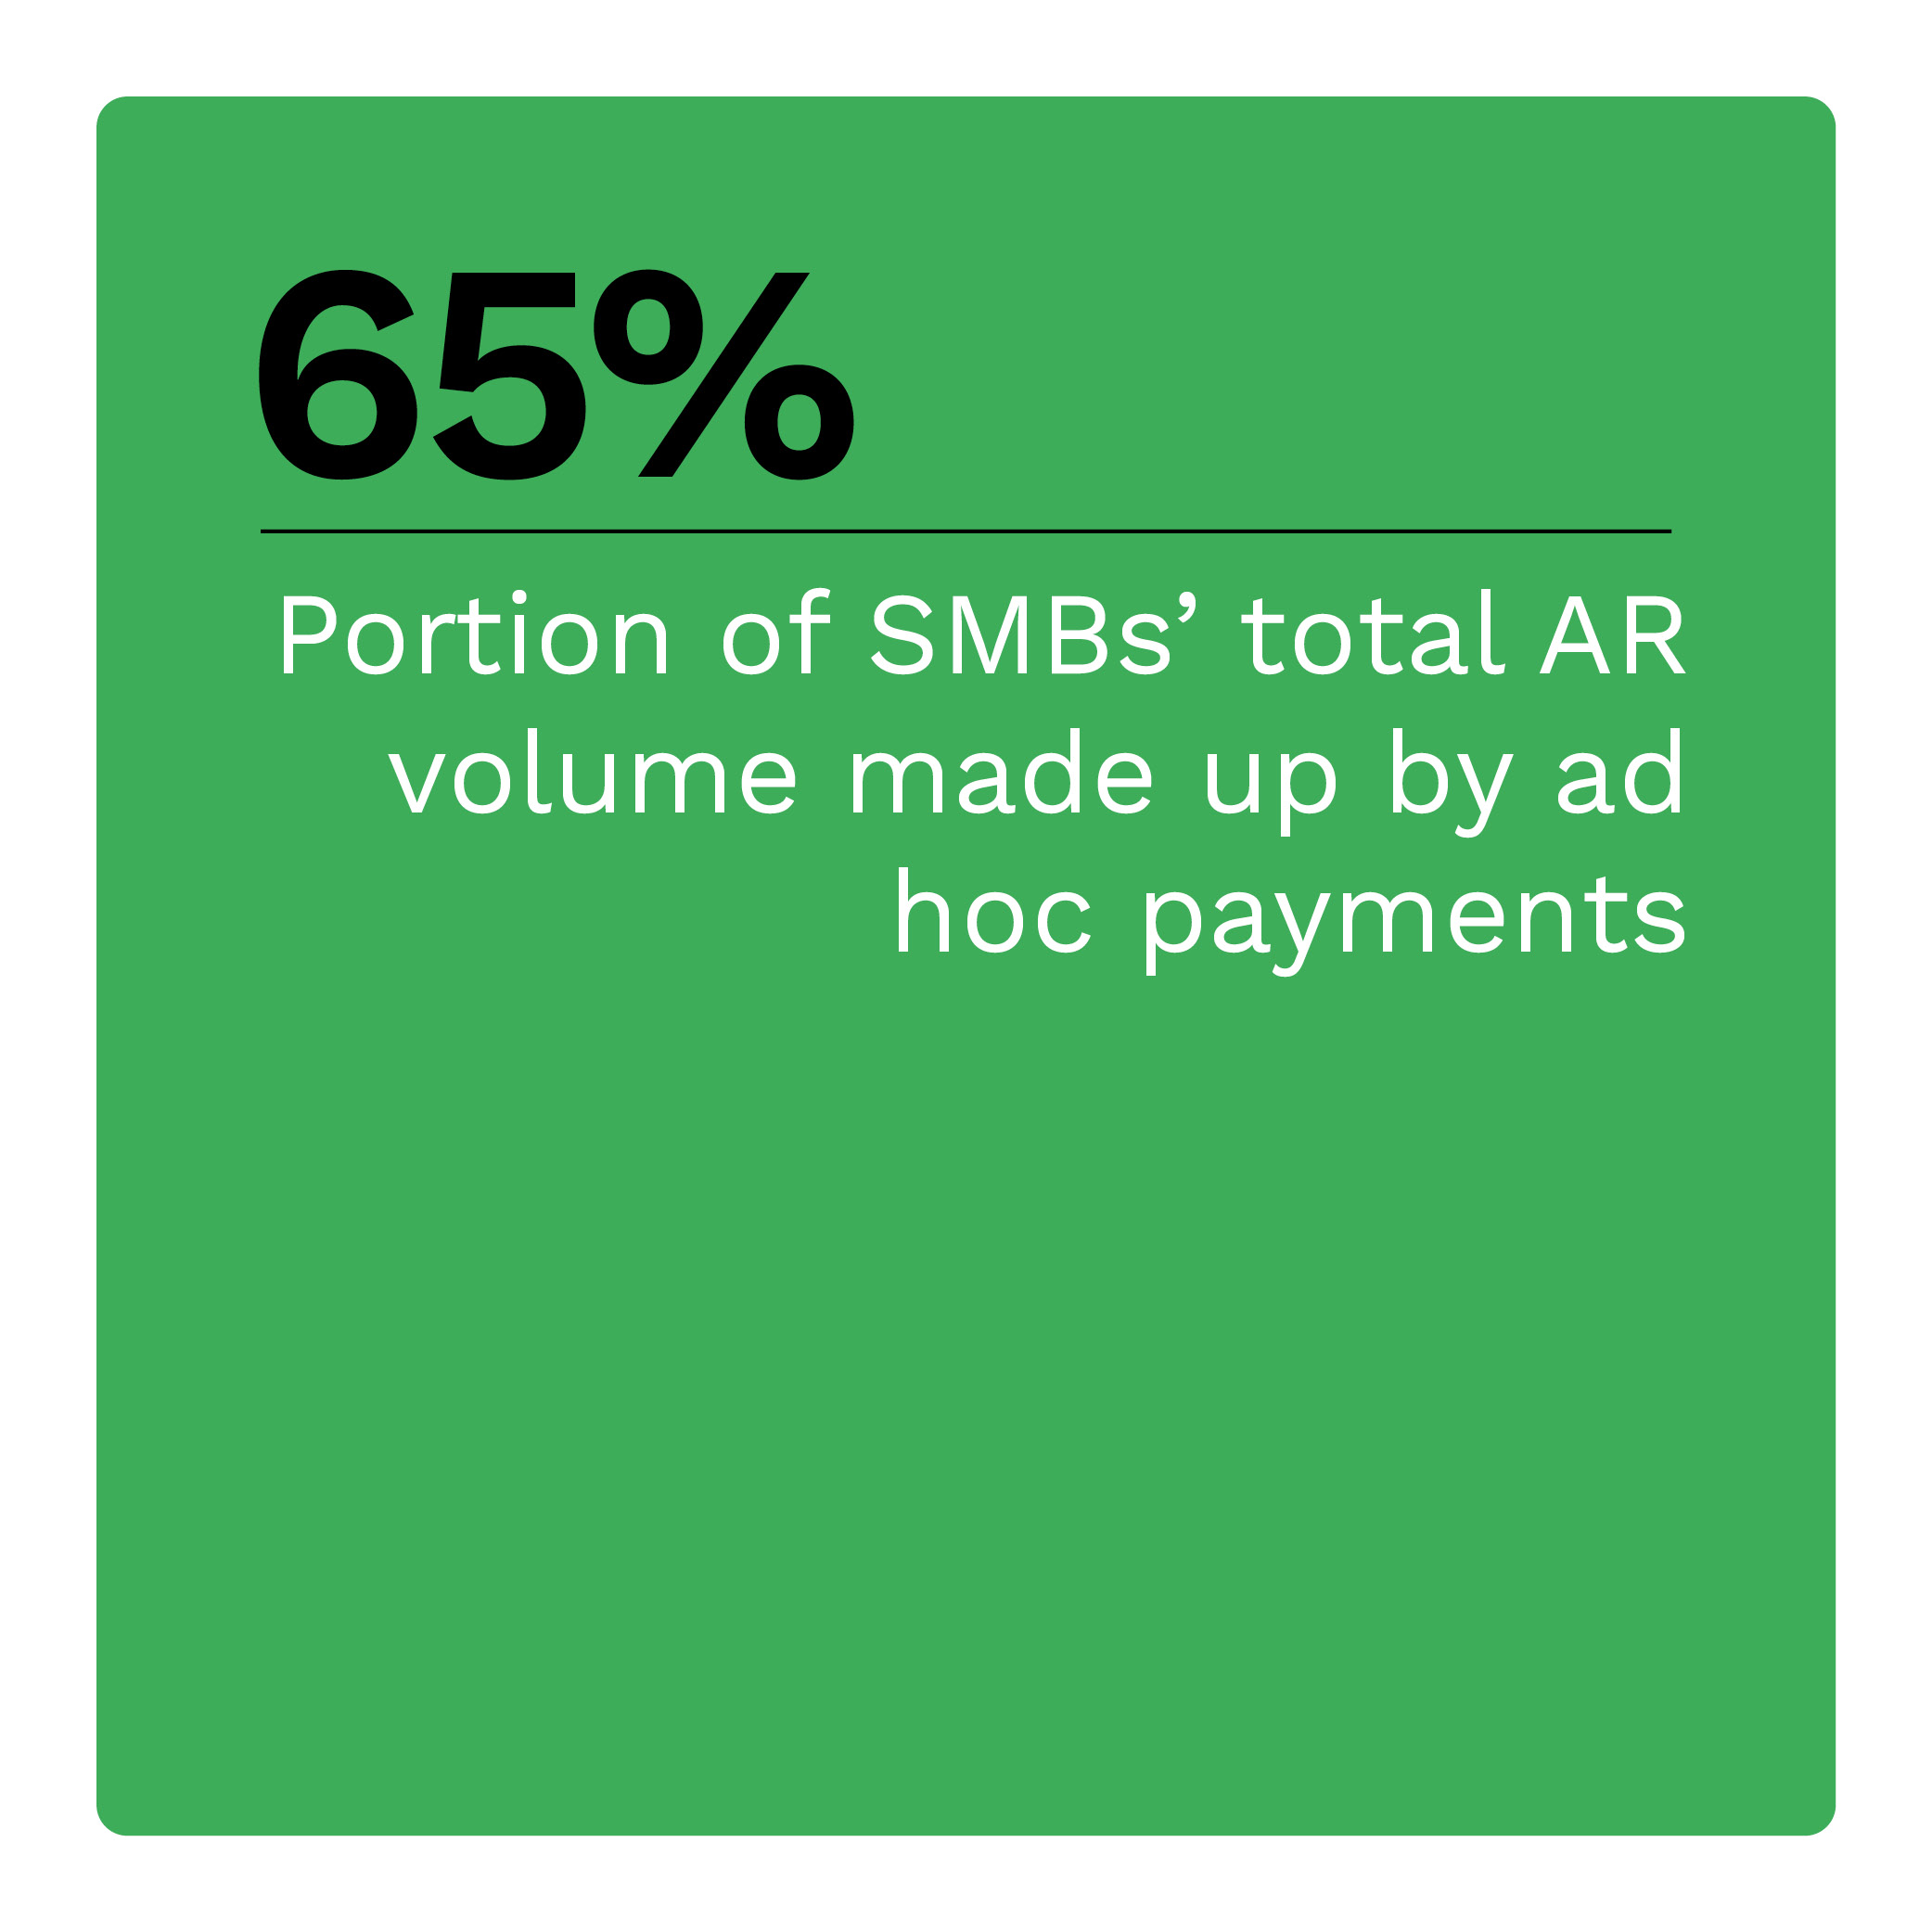 65%: Portion of total AR volume for SMBs made up by ad hoc payments